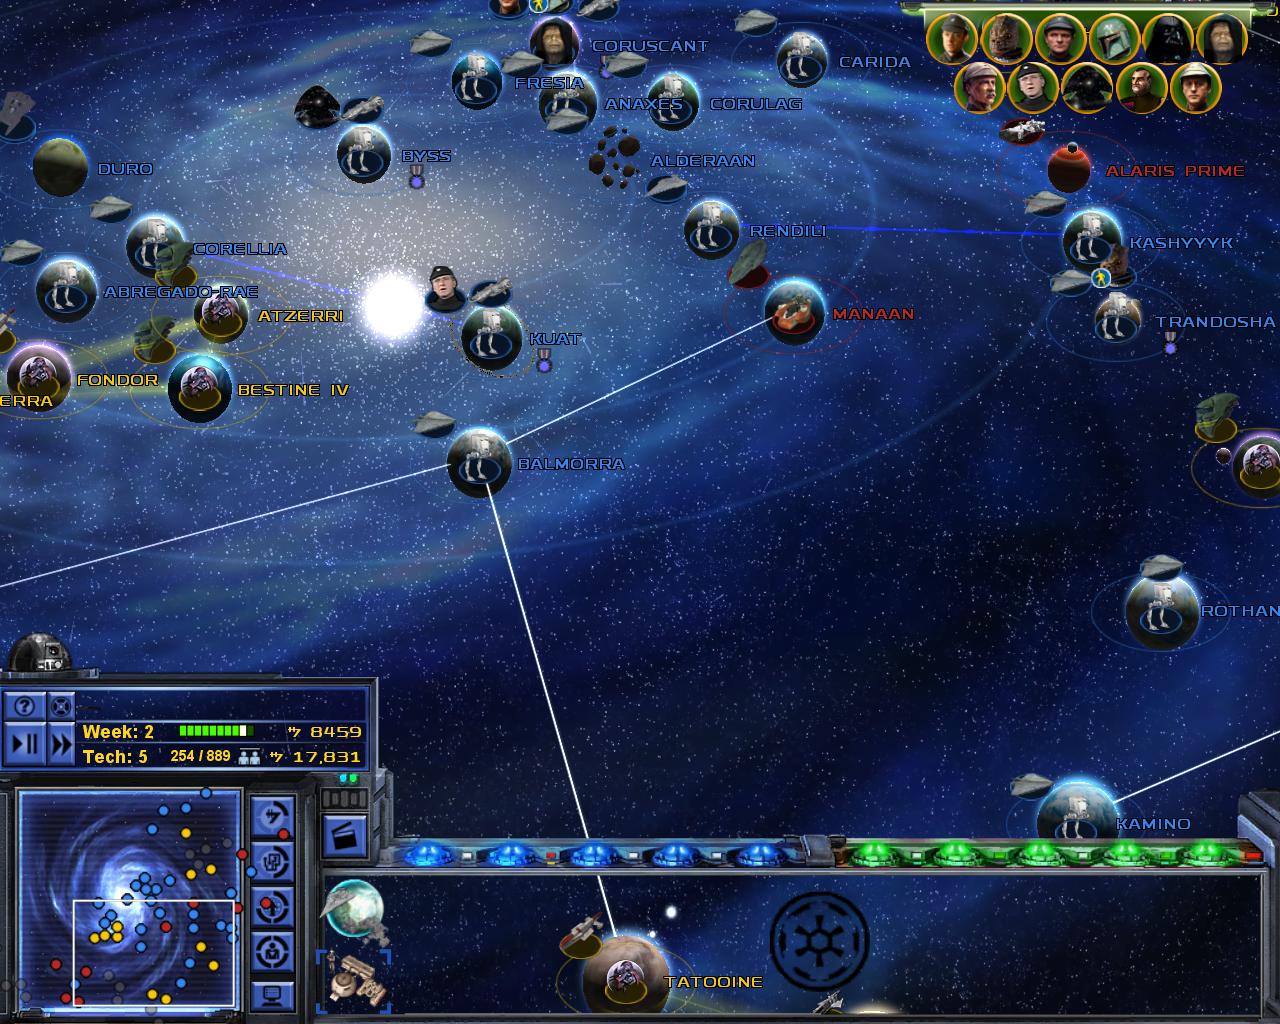 New Planets image - Super Star Wars: Rise of the Droid Empire mod for Star Wars ...1280 x 1024